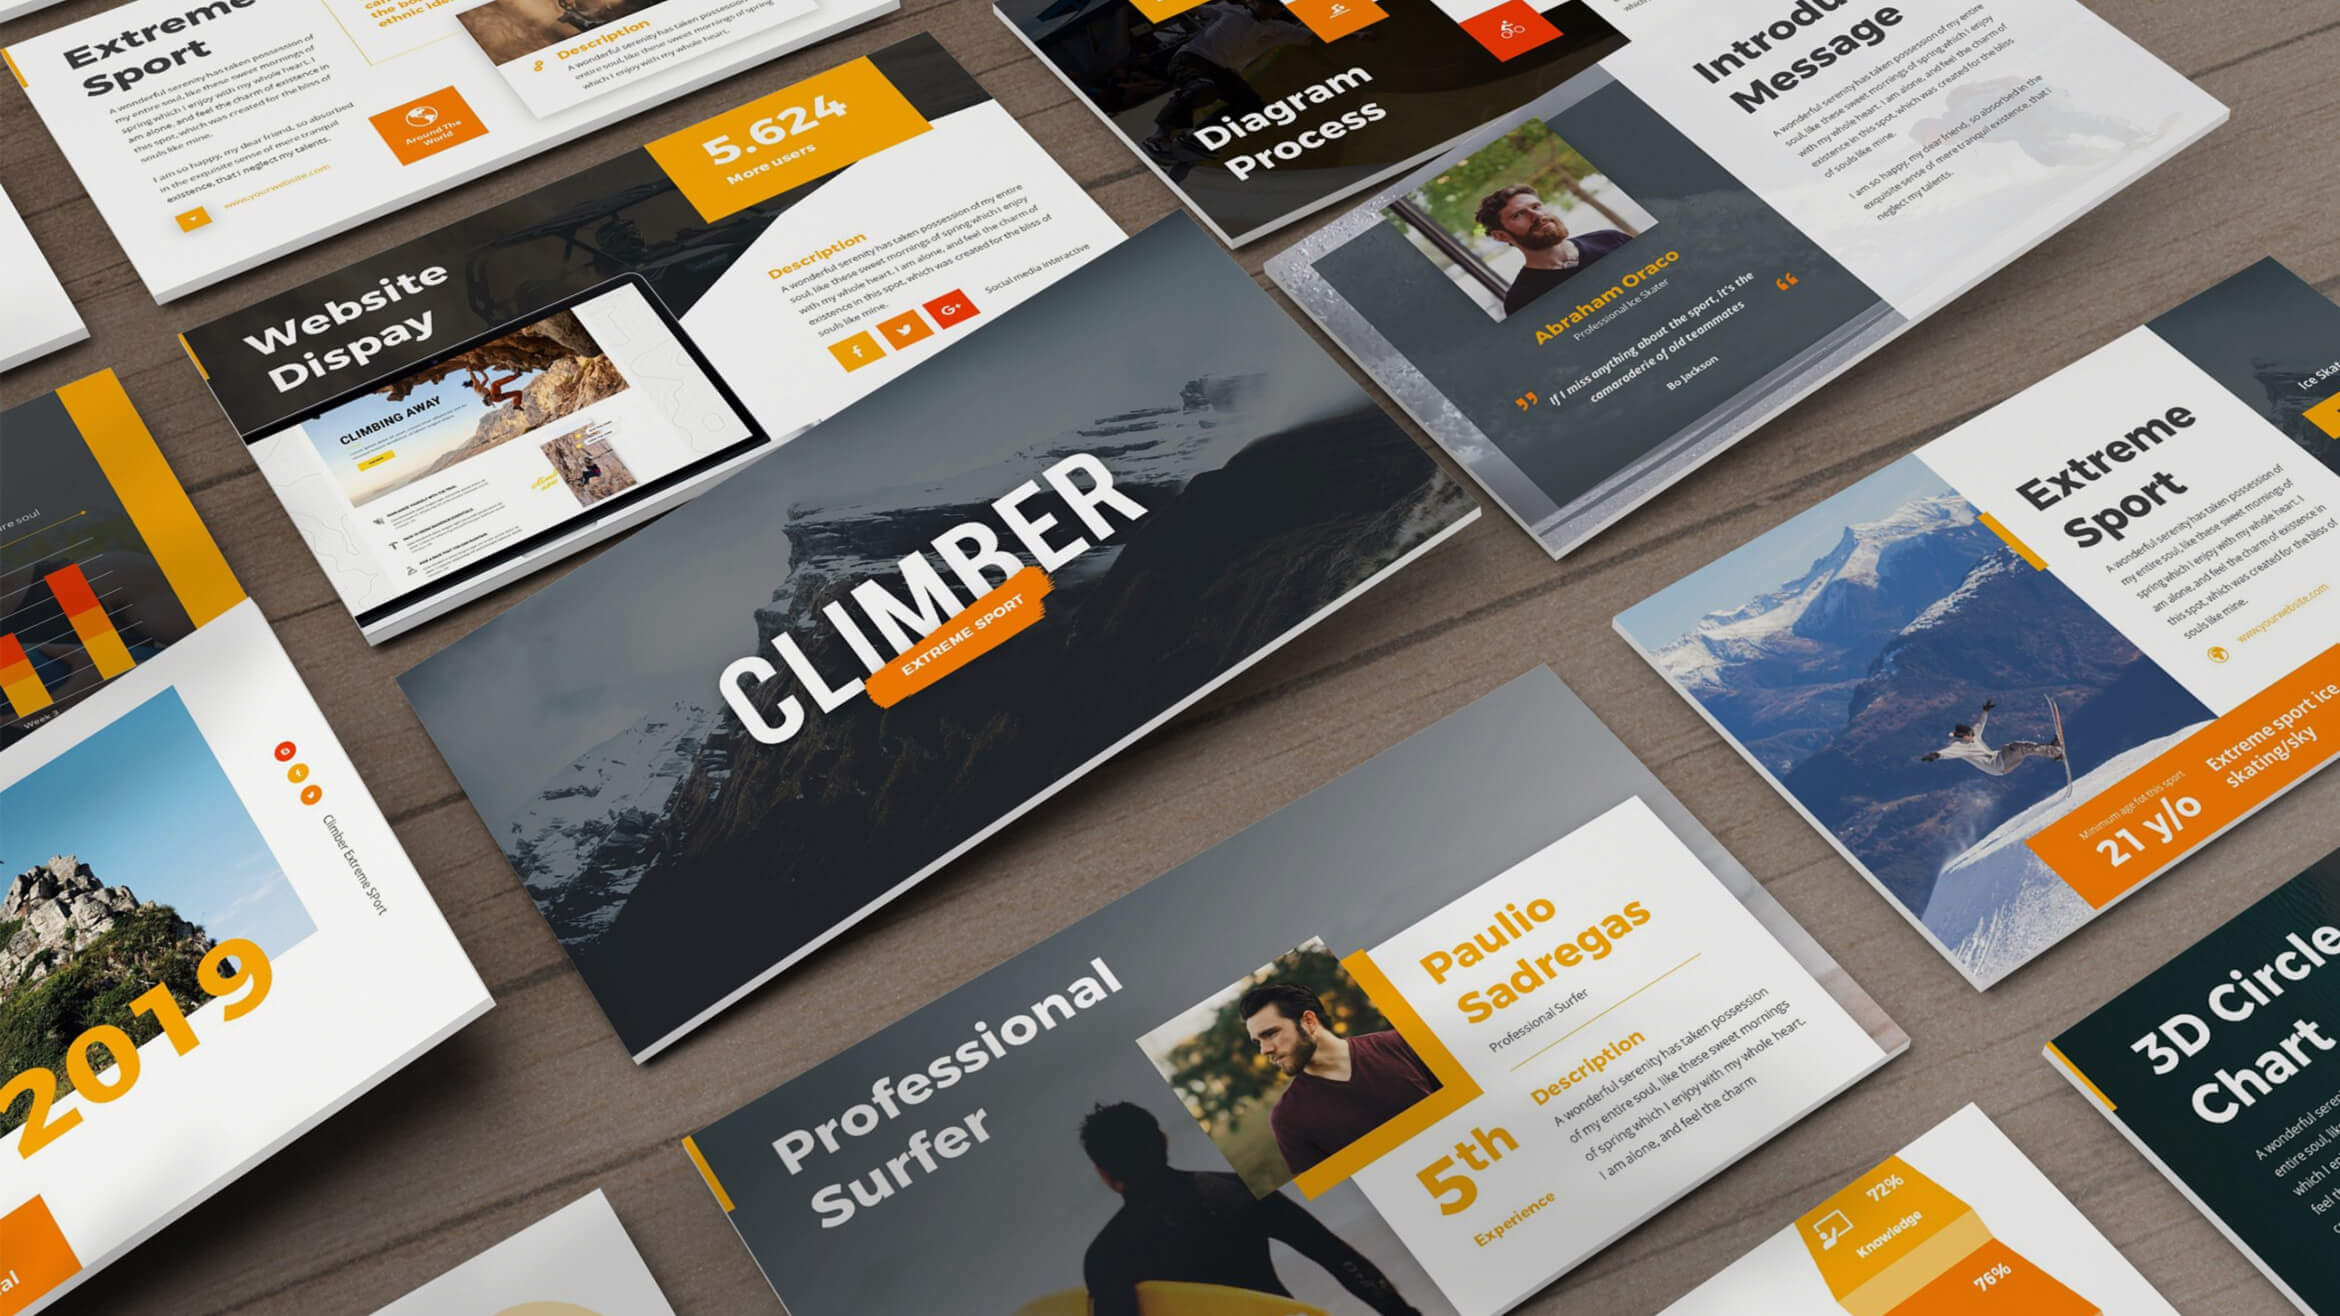 Climber - Free Extreme Powerpoint Template (5 slides)